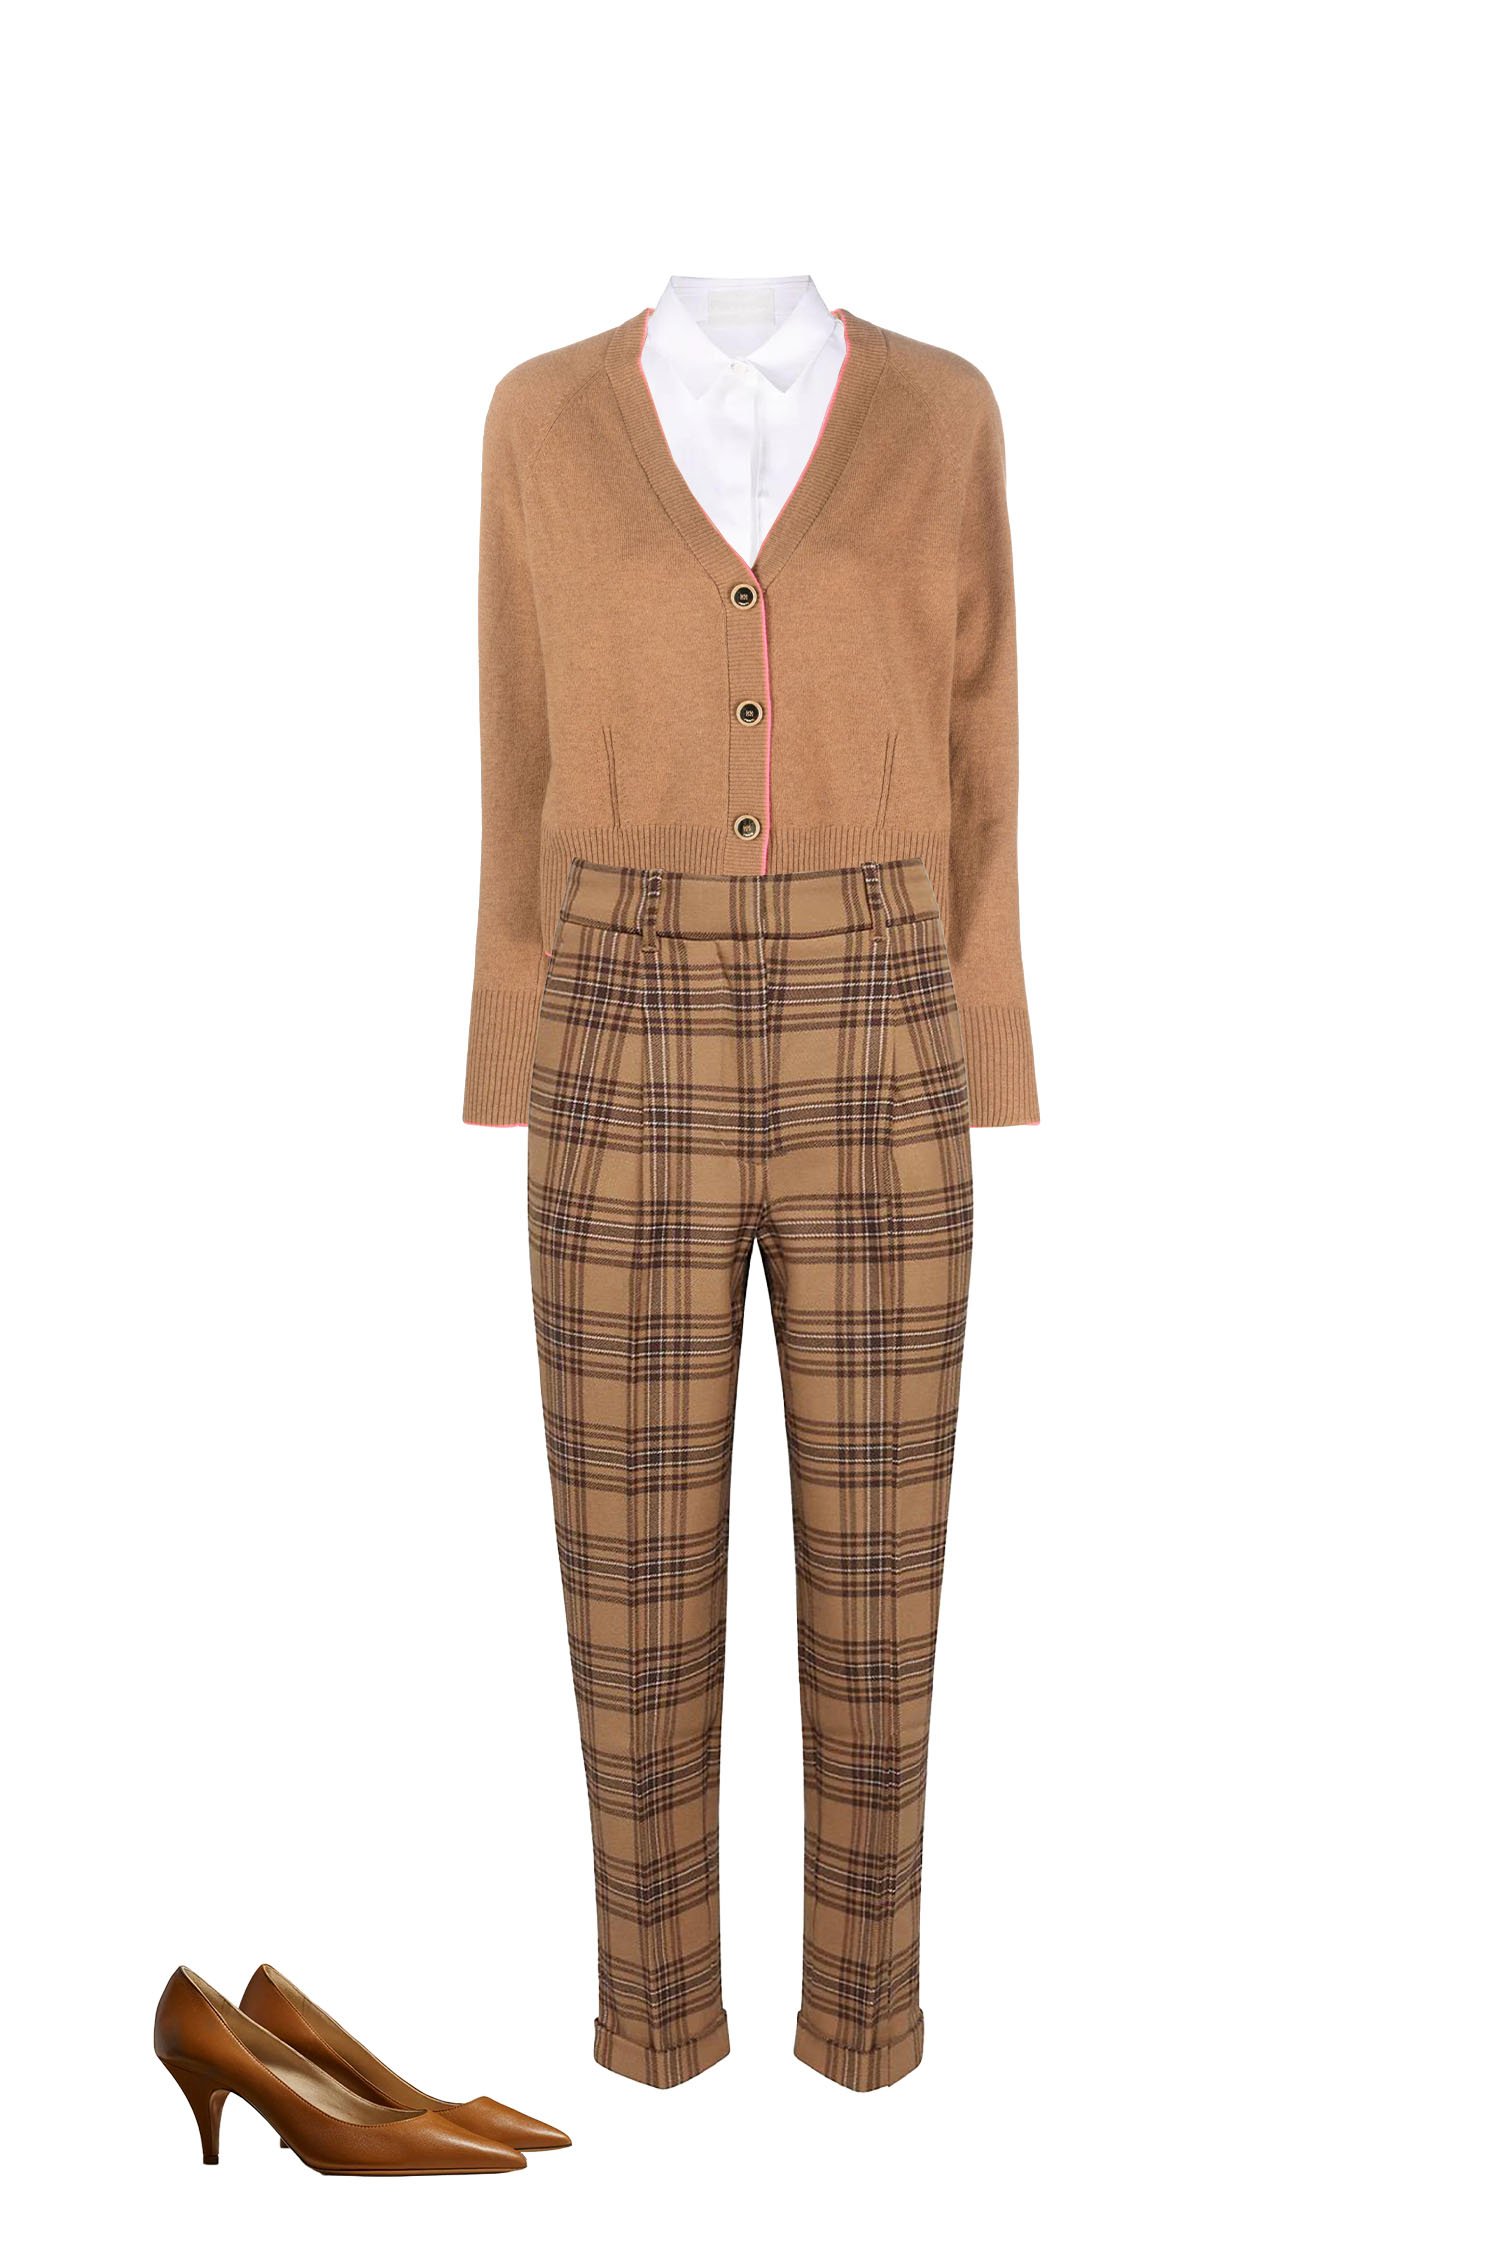 Spring Office Outfit - Camel Plaid Pants, White Shirt, Camel Cardigan, Brown Pumps